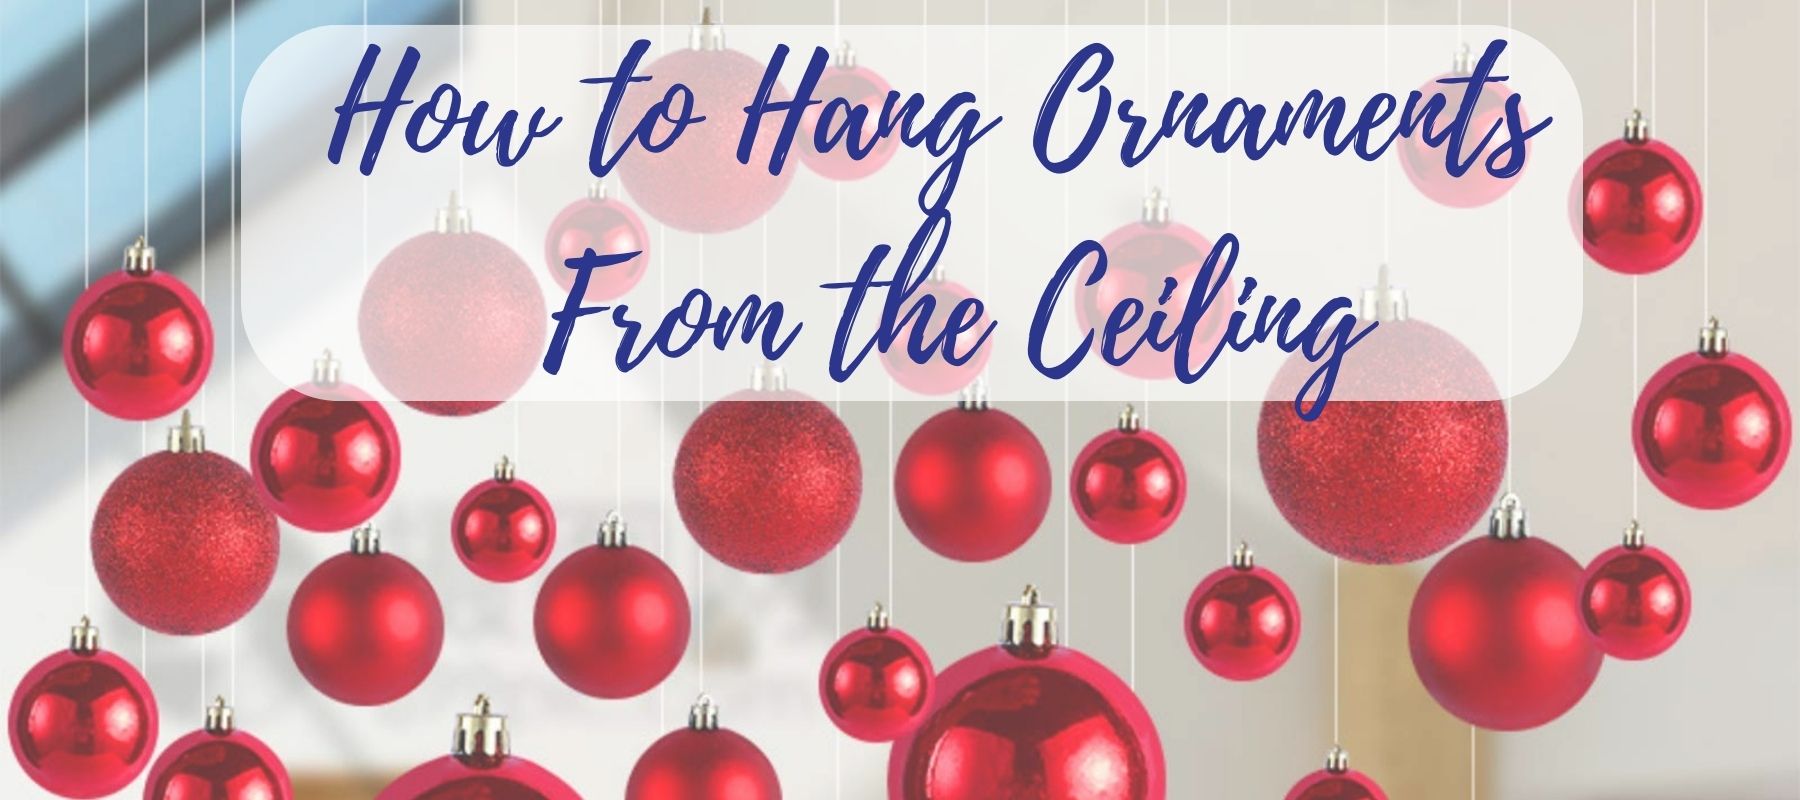 How-to-hang-ornament-from-the-ceiling